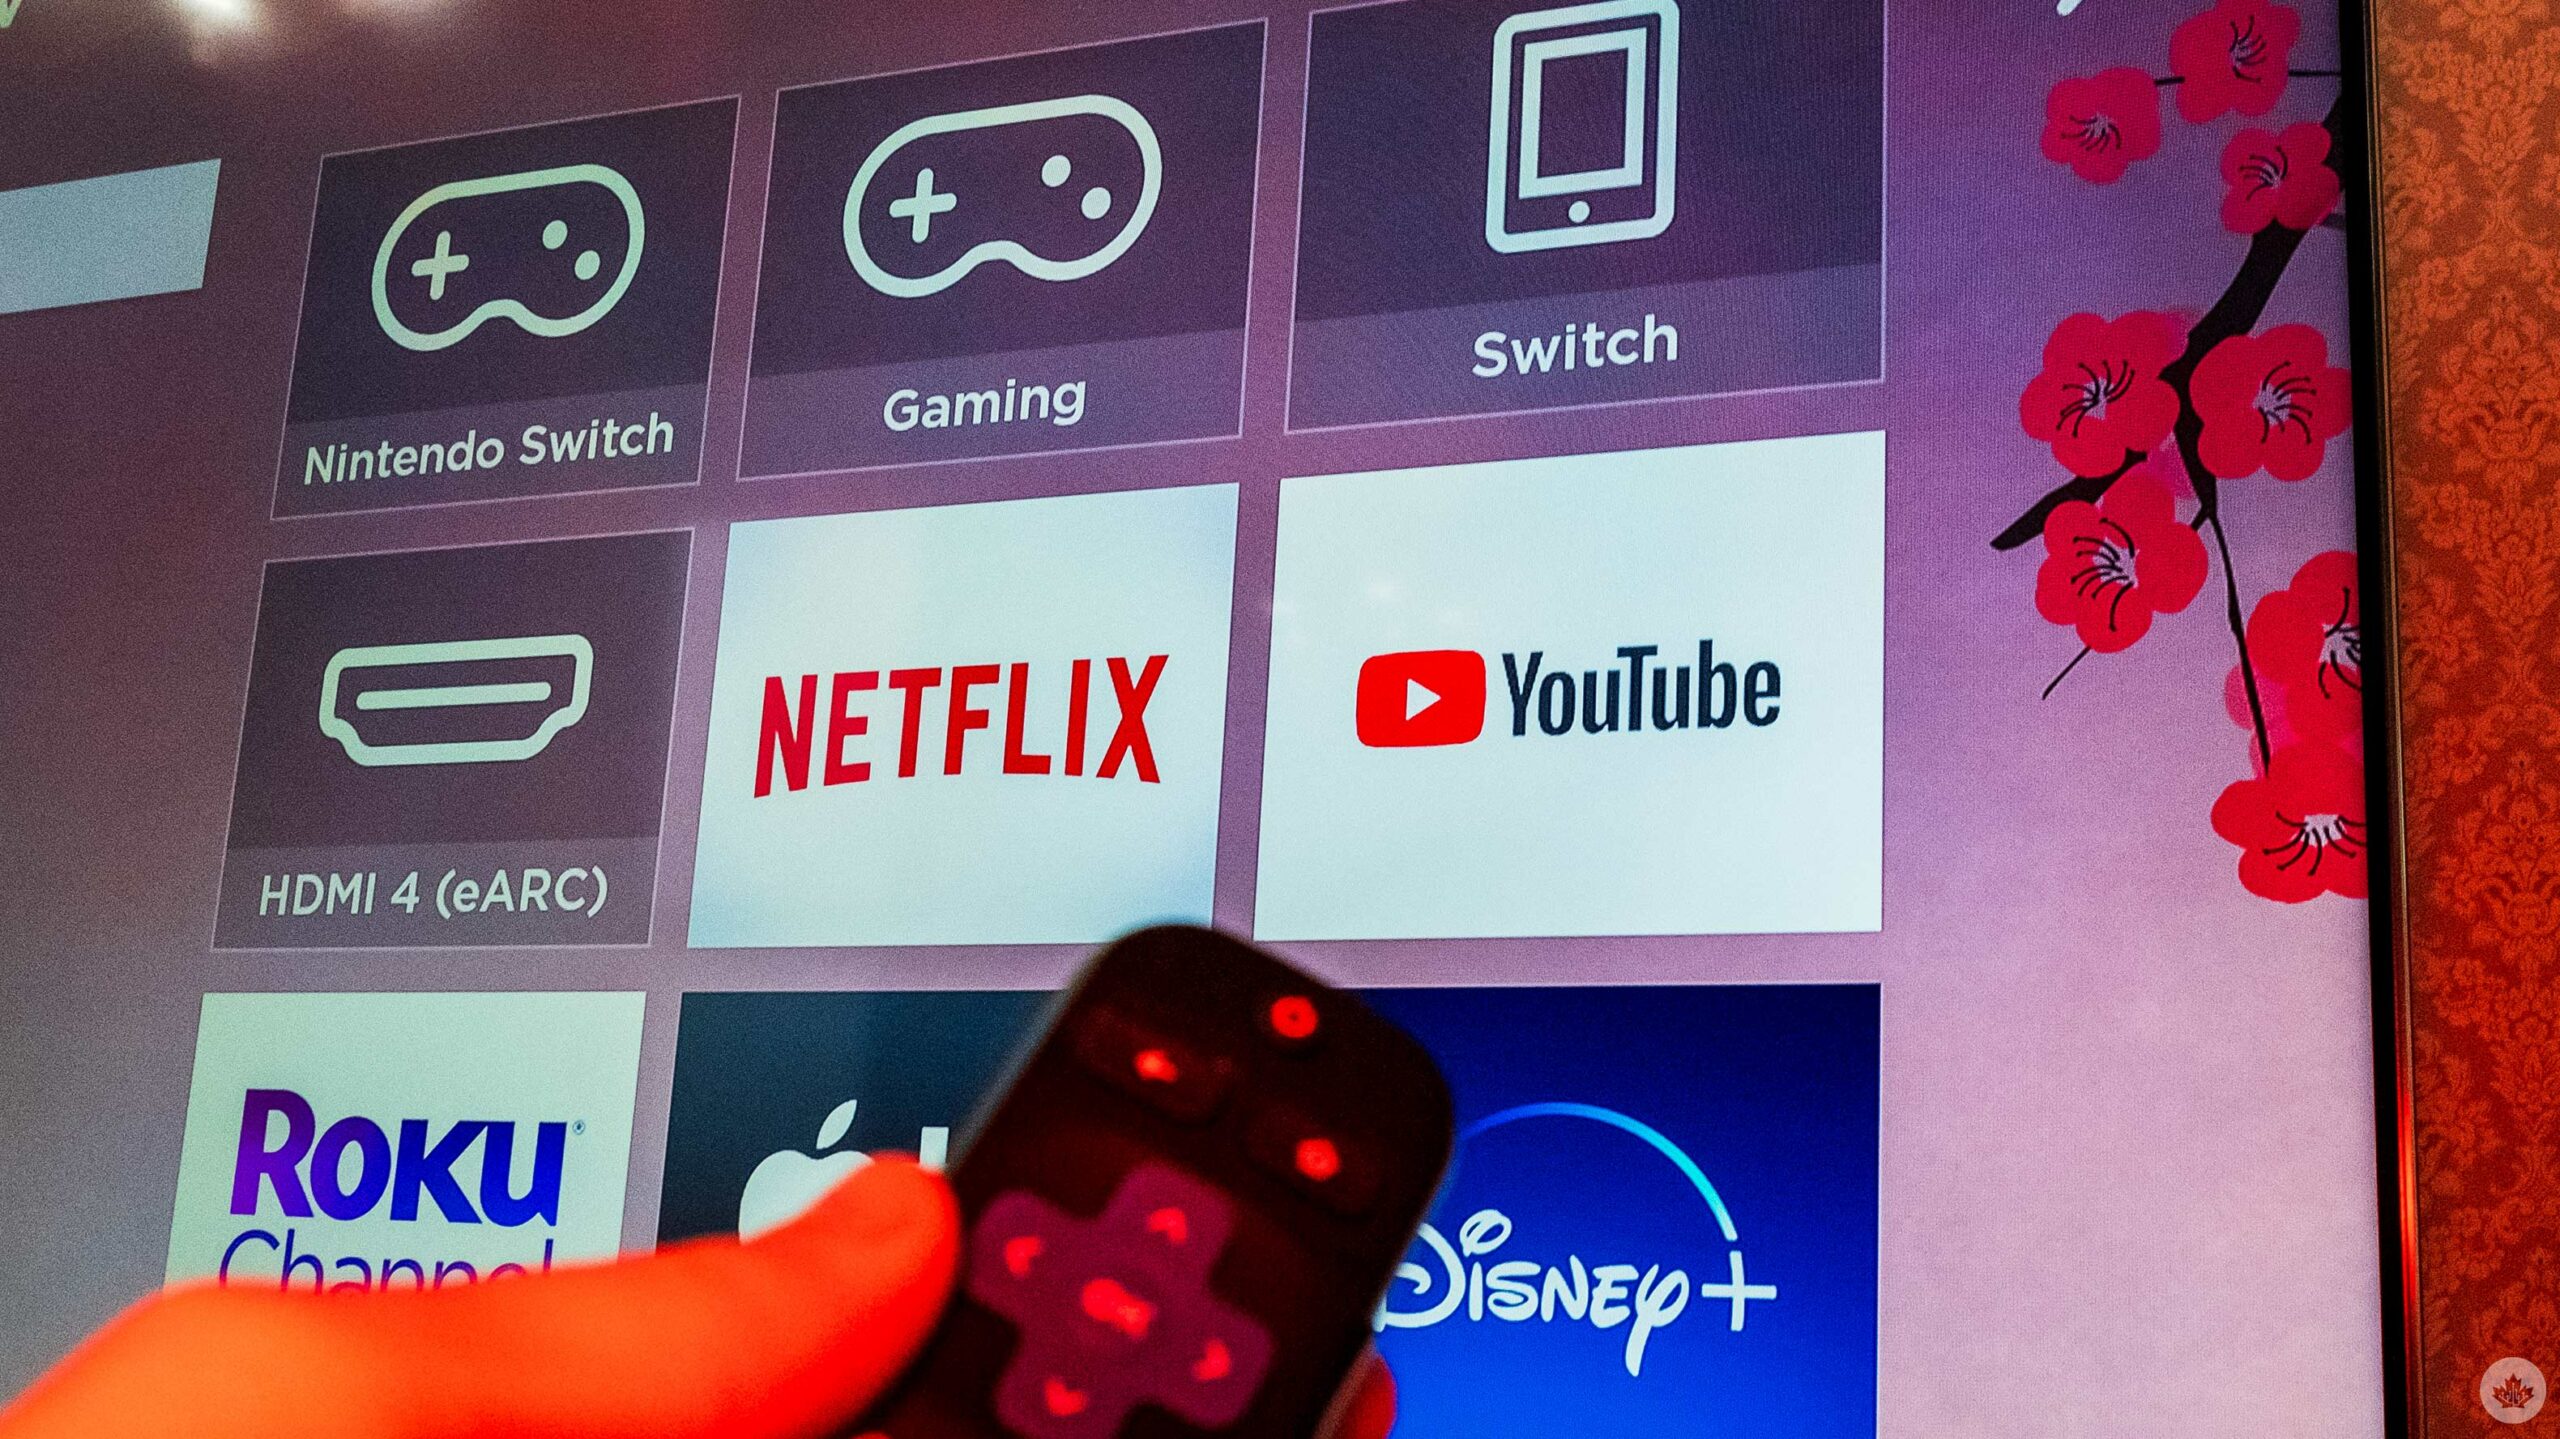 brian soderholm recommends How To Add Pornhub To My Roku